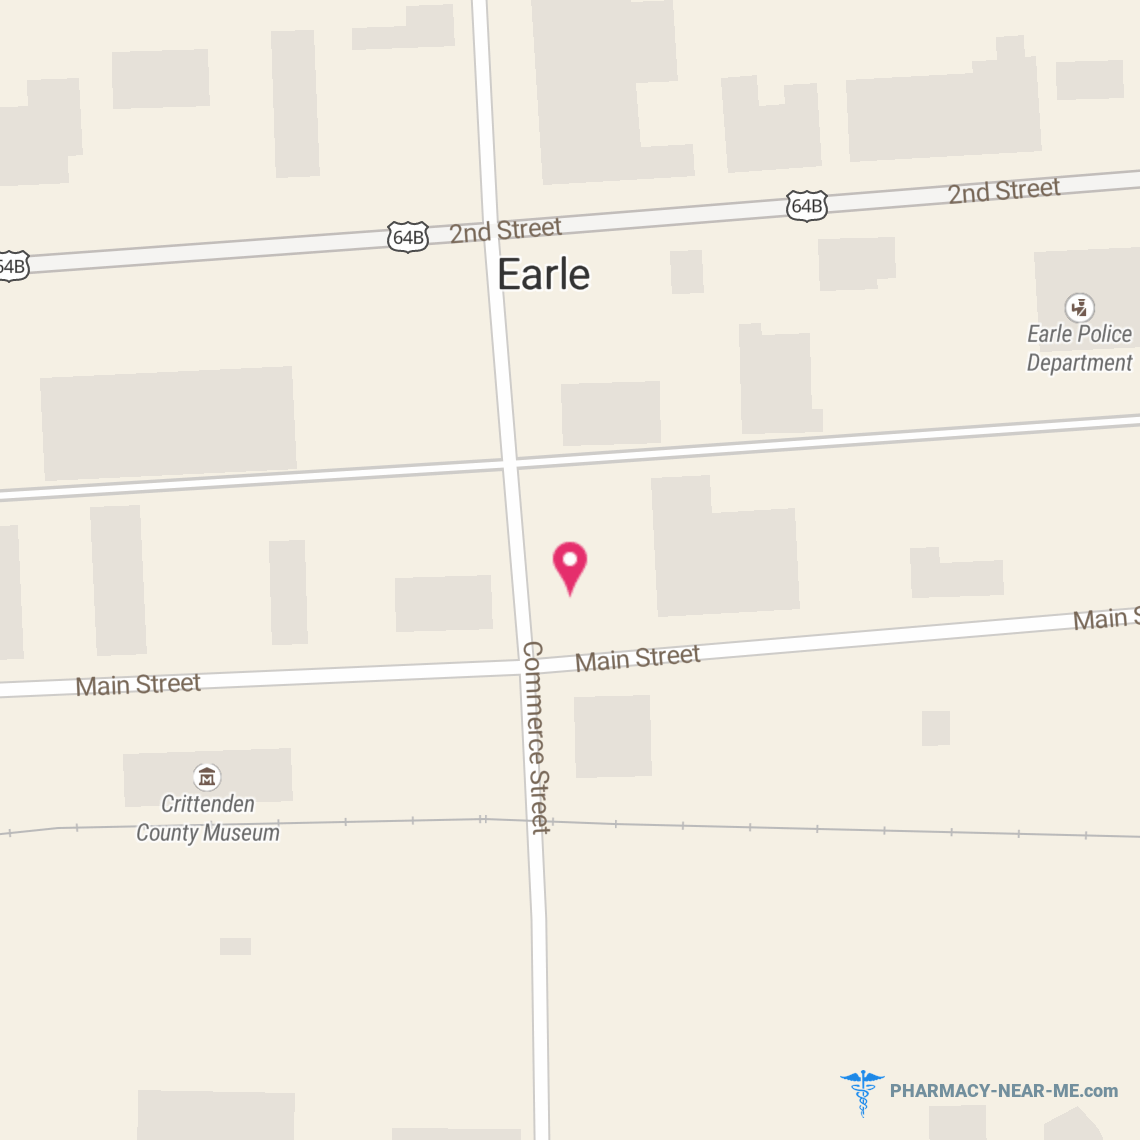 FONGS DRUGS - Pharmacy Hours, Phone, Reviews & Information: 621 Commerce Street, Earle, Arkansas 72331, United States